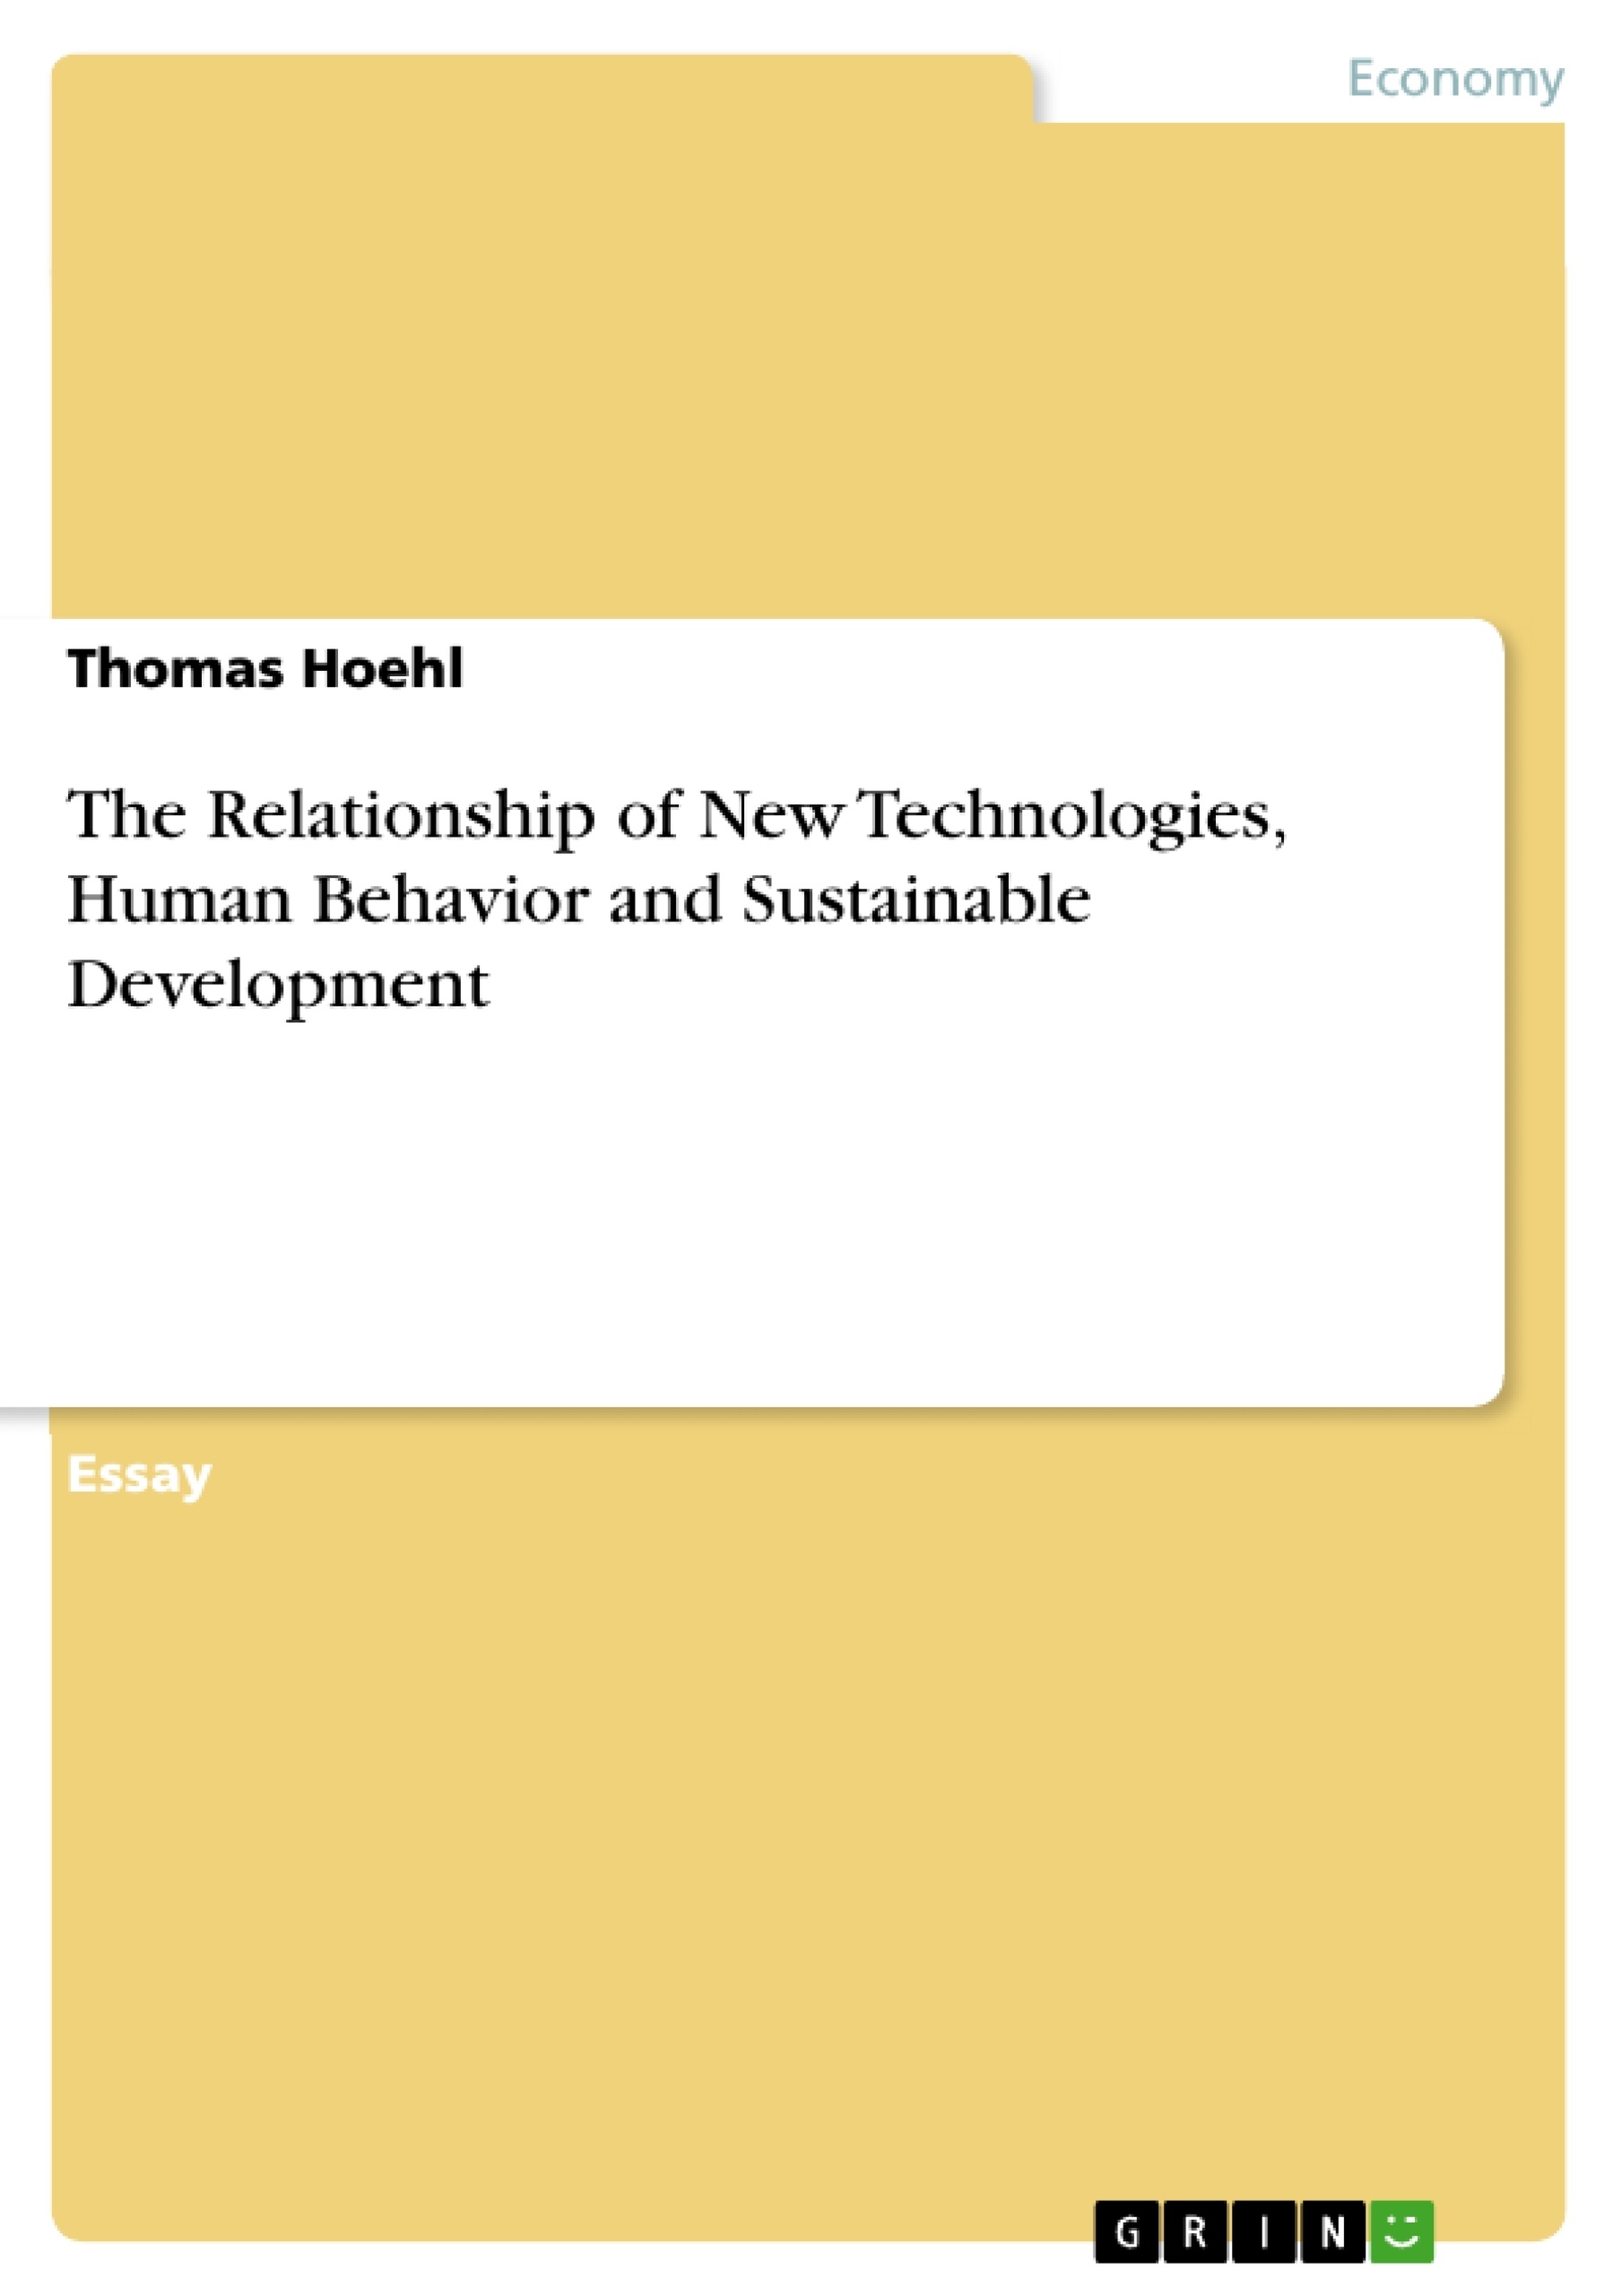 Title: The Relationship of New Technologies, Human Behavior and Sustainable Development